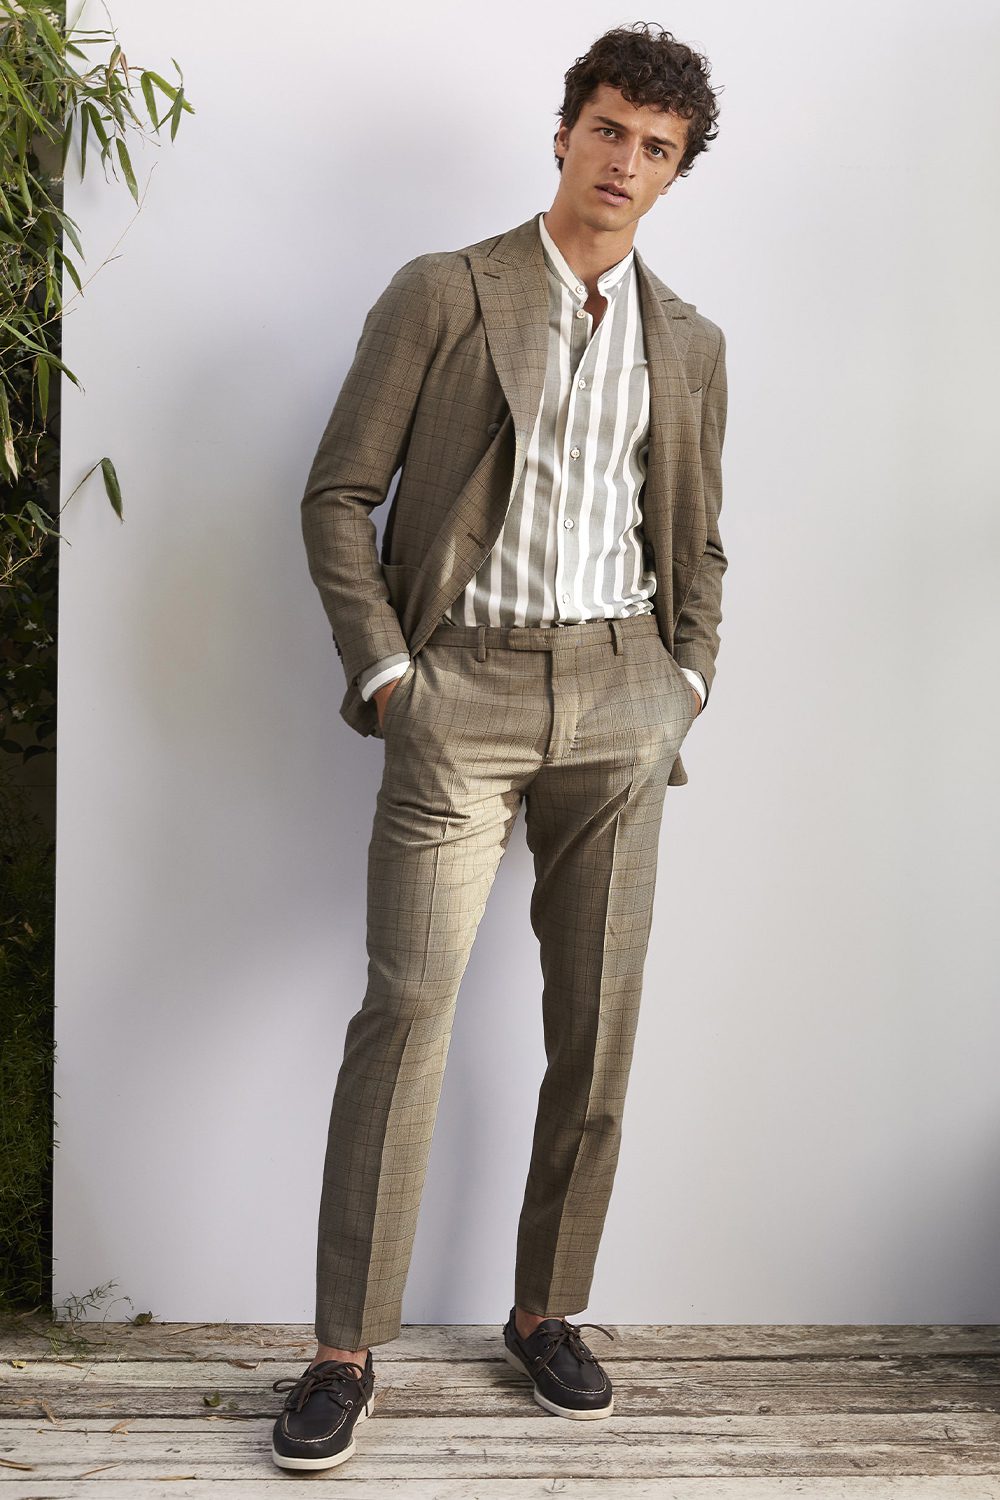 The Definitive Guide to Wedding Guest Dress Codes for Men - Proper Cloth